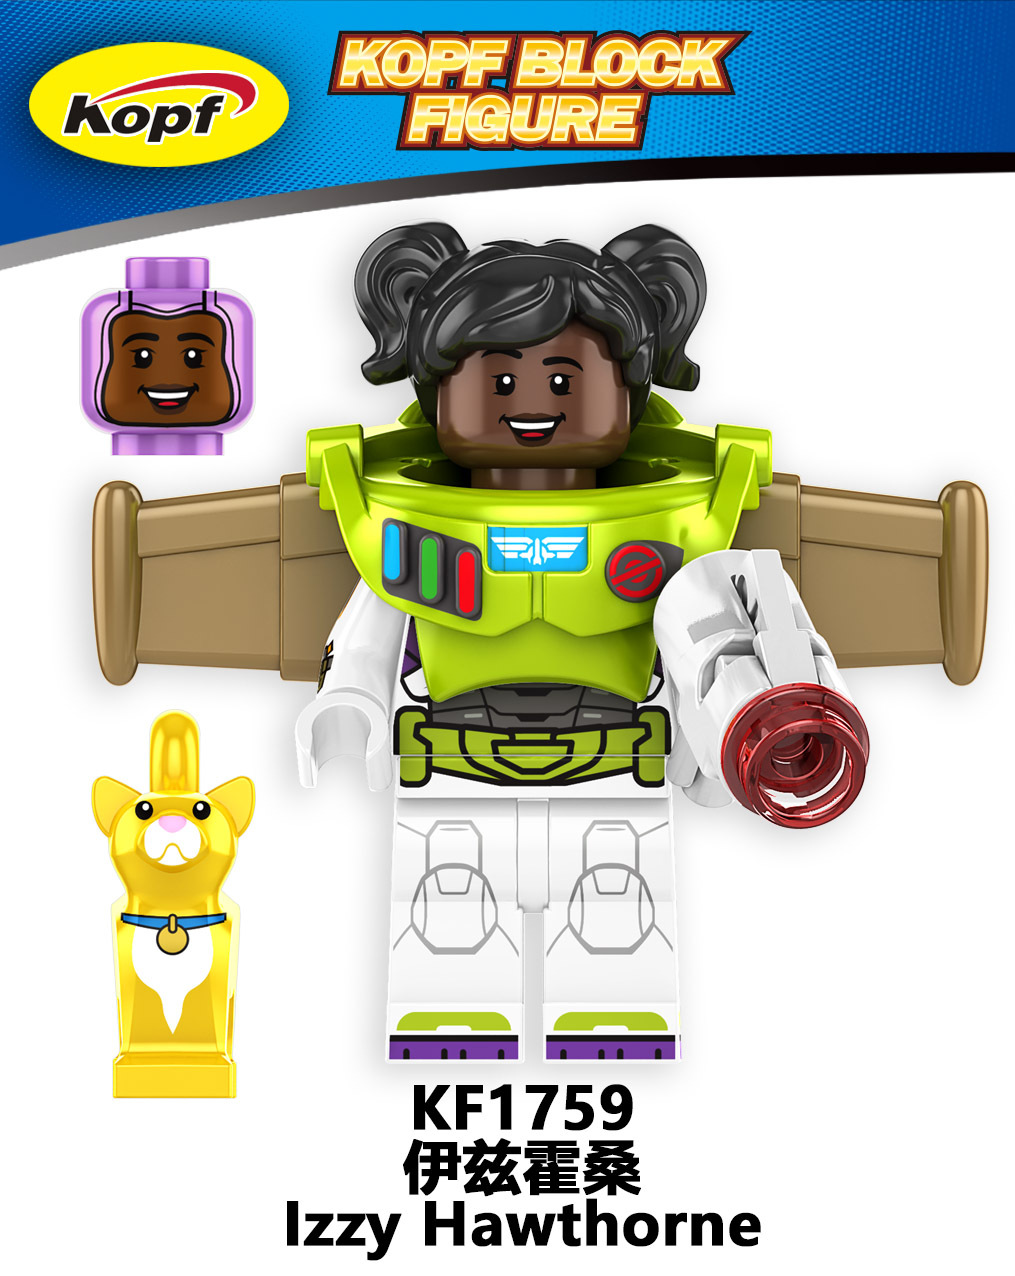 KF6166 KF1752 KF1753 KF1754 KF1755 KF1756 KF1757 KF1758 KF1759 KF1762 Cartoon Series Mini Building Blocks Hello Kitty Buzz Lightyear Zach The Great Demon Action Figures Educational Toys For Kids Gifts